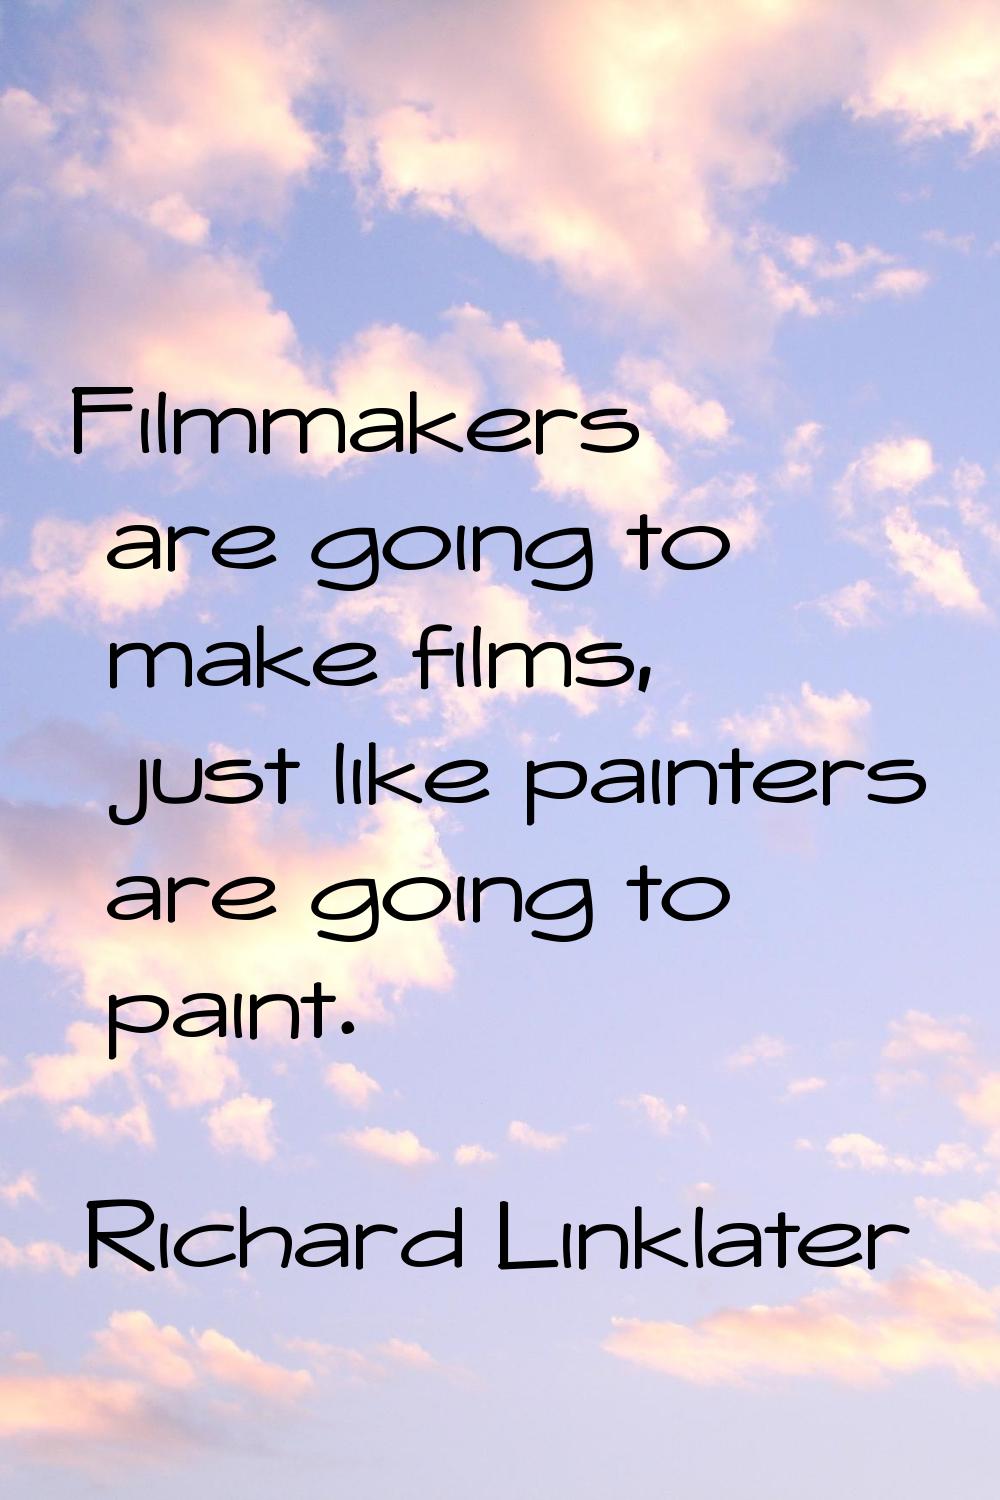 Filmmakers are going to make films, just like painters are going to paint.